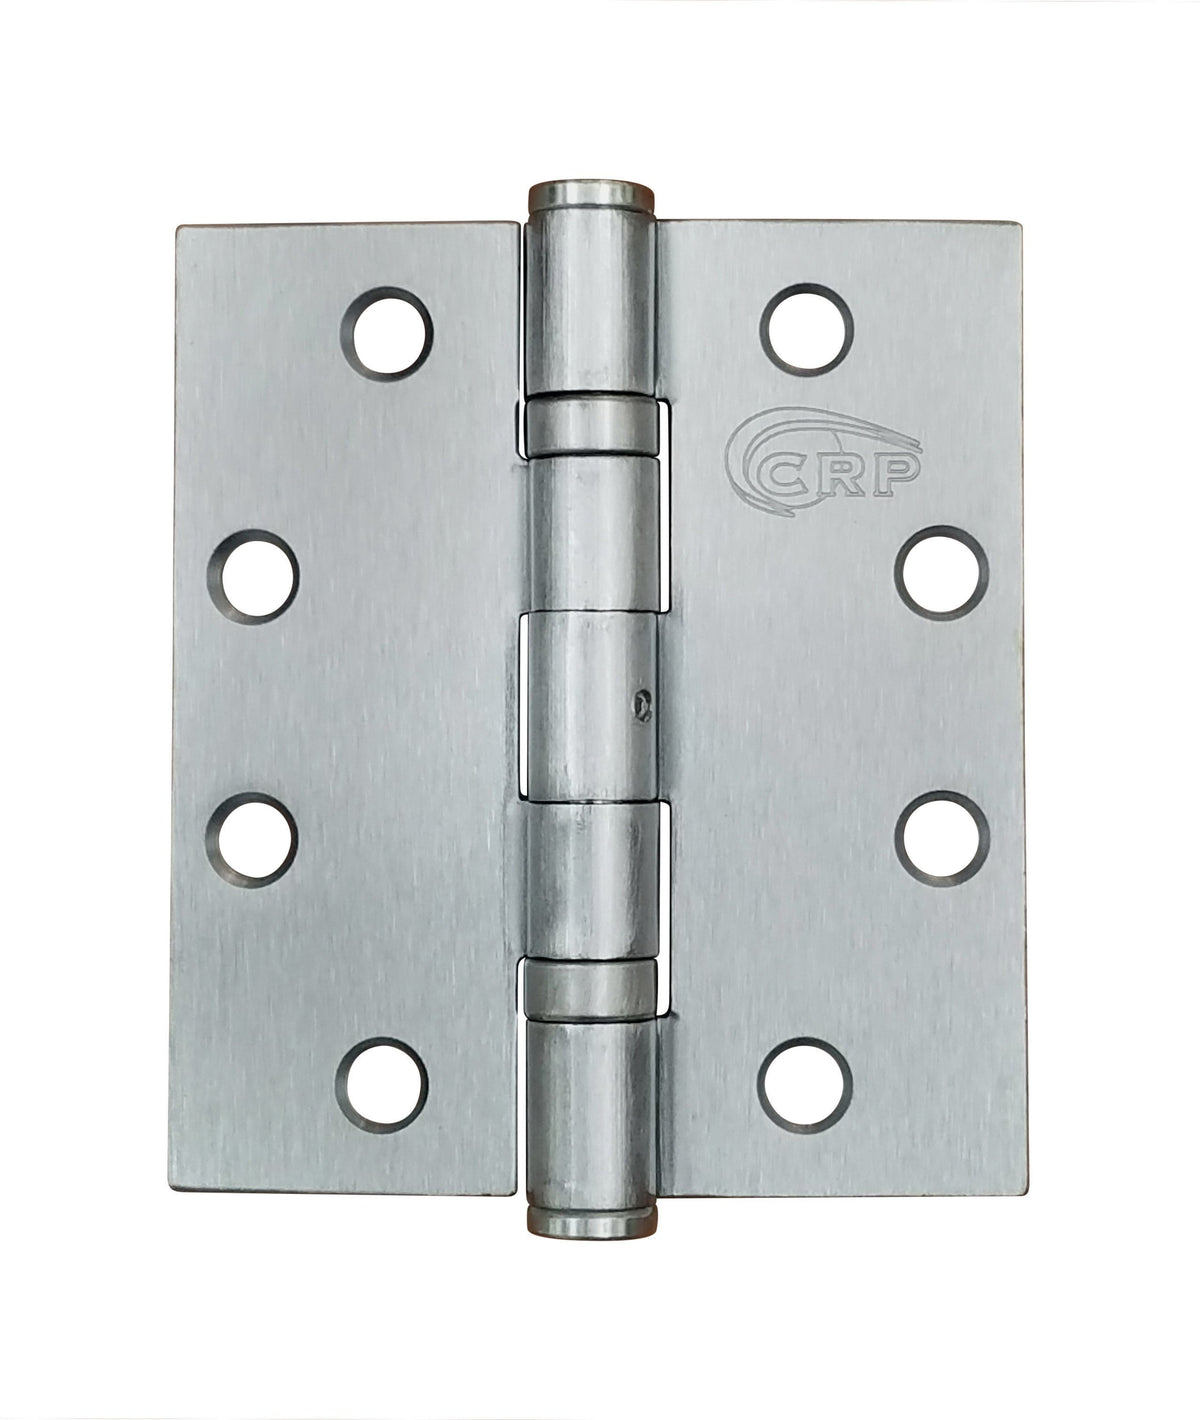 Commercial Ball Bearing Hinges - Heavy Duty Commercial Ball Bearing Door Hinges - 4.5" Inch X 4" Inch - Satin Chrome - Non Removable Pin - 2 Pack